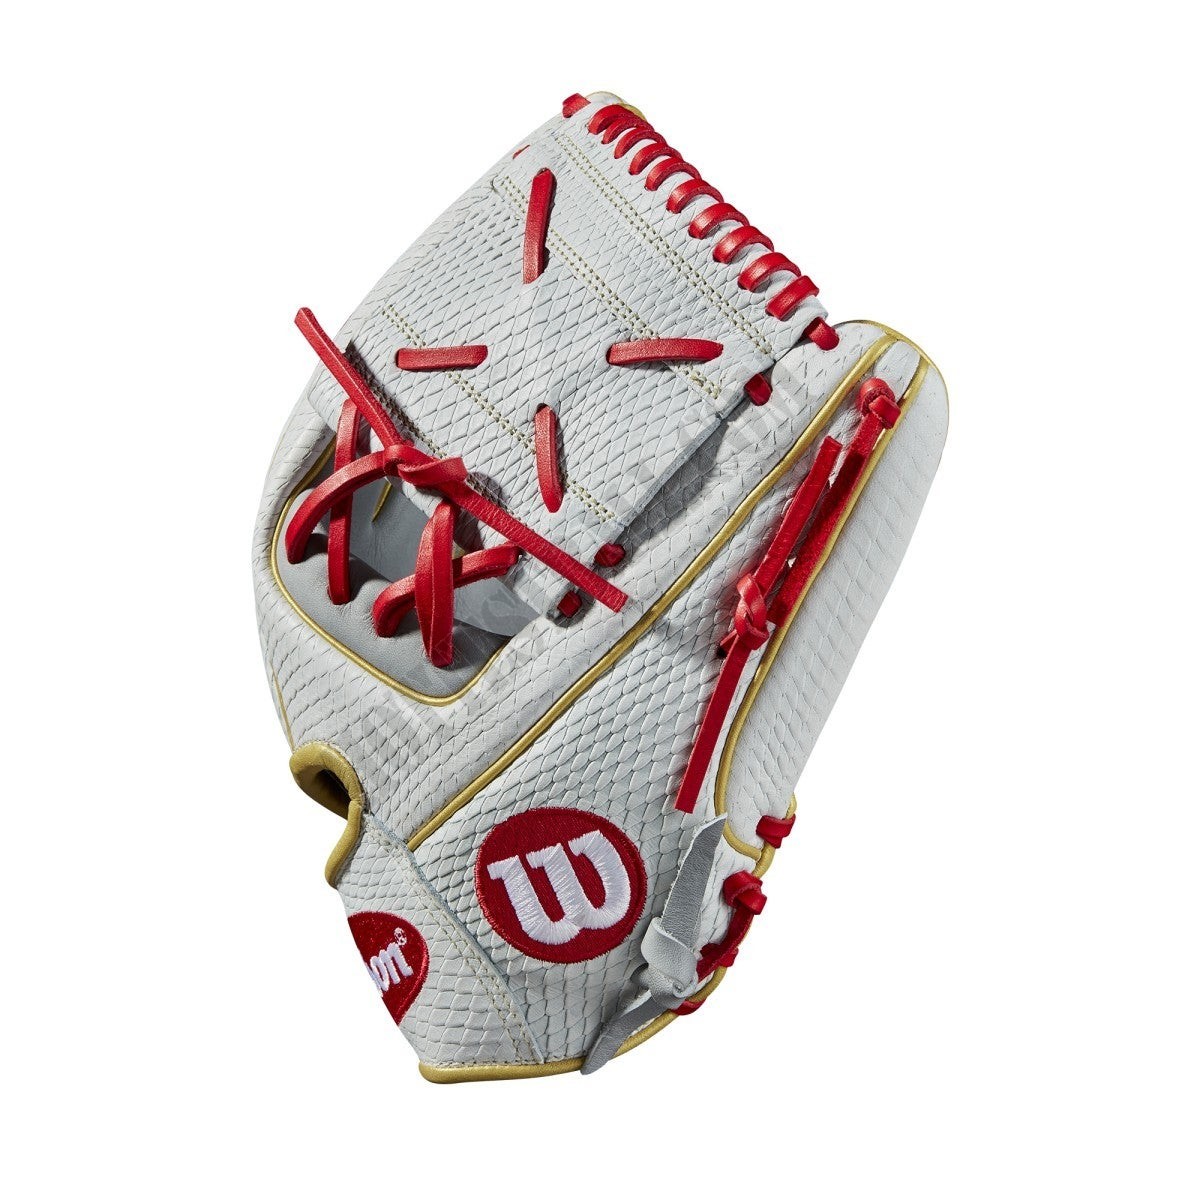 2020 A2000 12" KS7 GM Infield Fastpitch Glove ● Wilson Promotions - -7